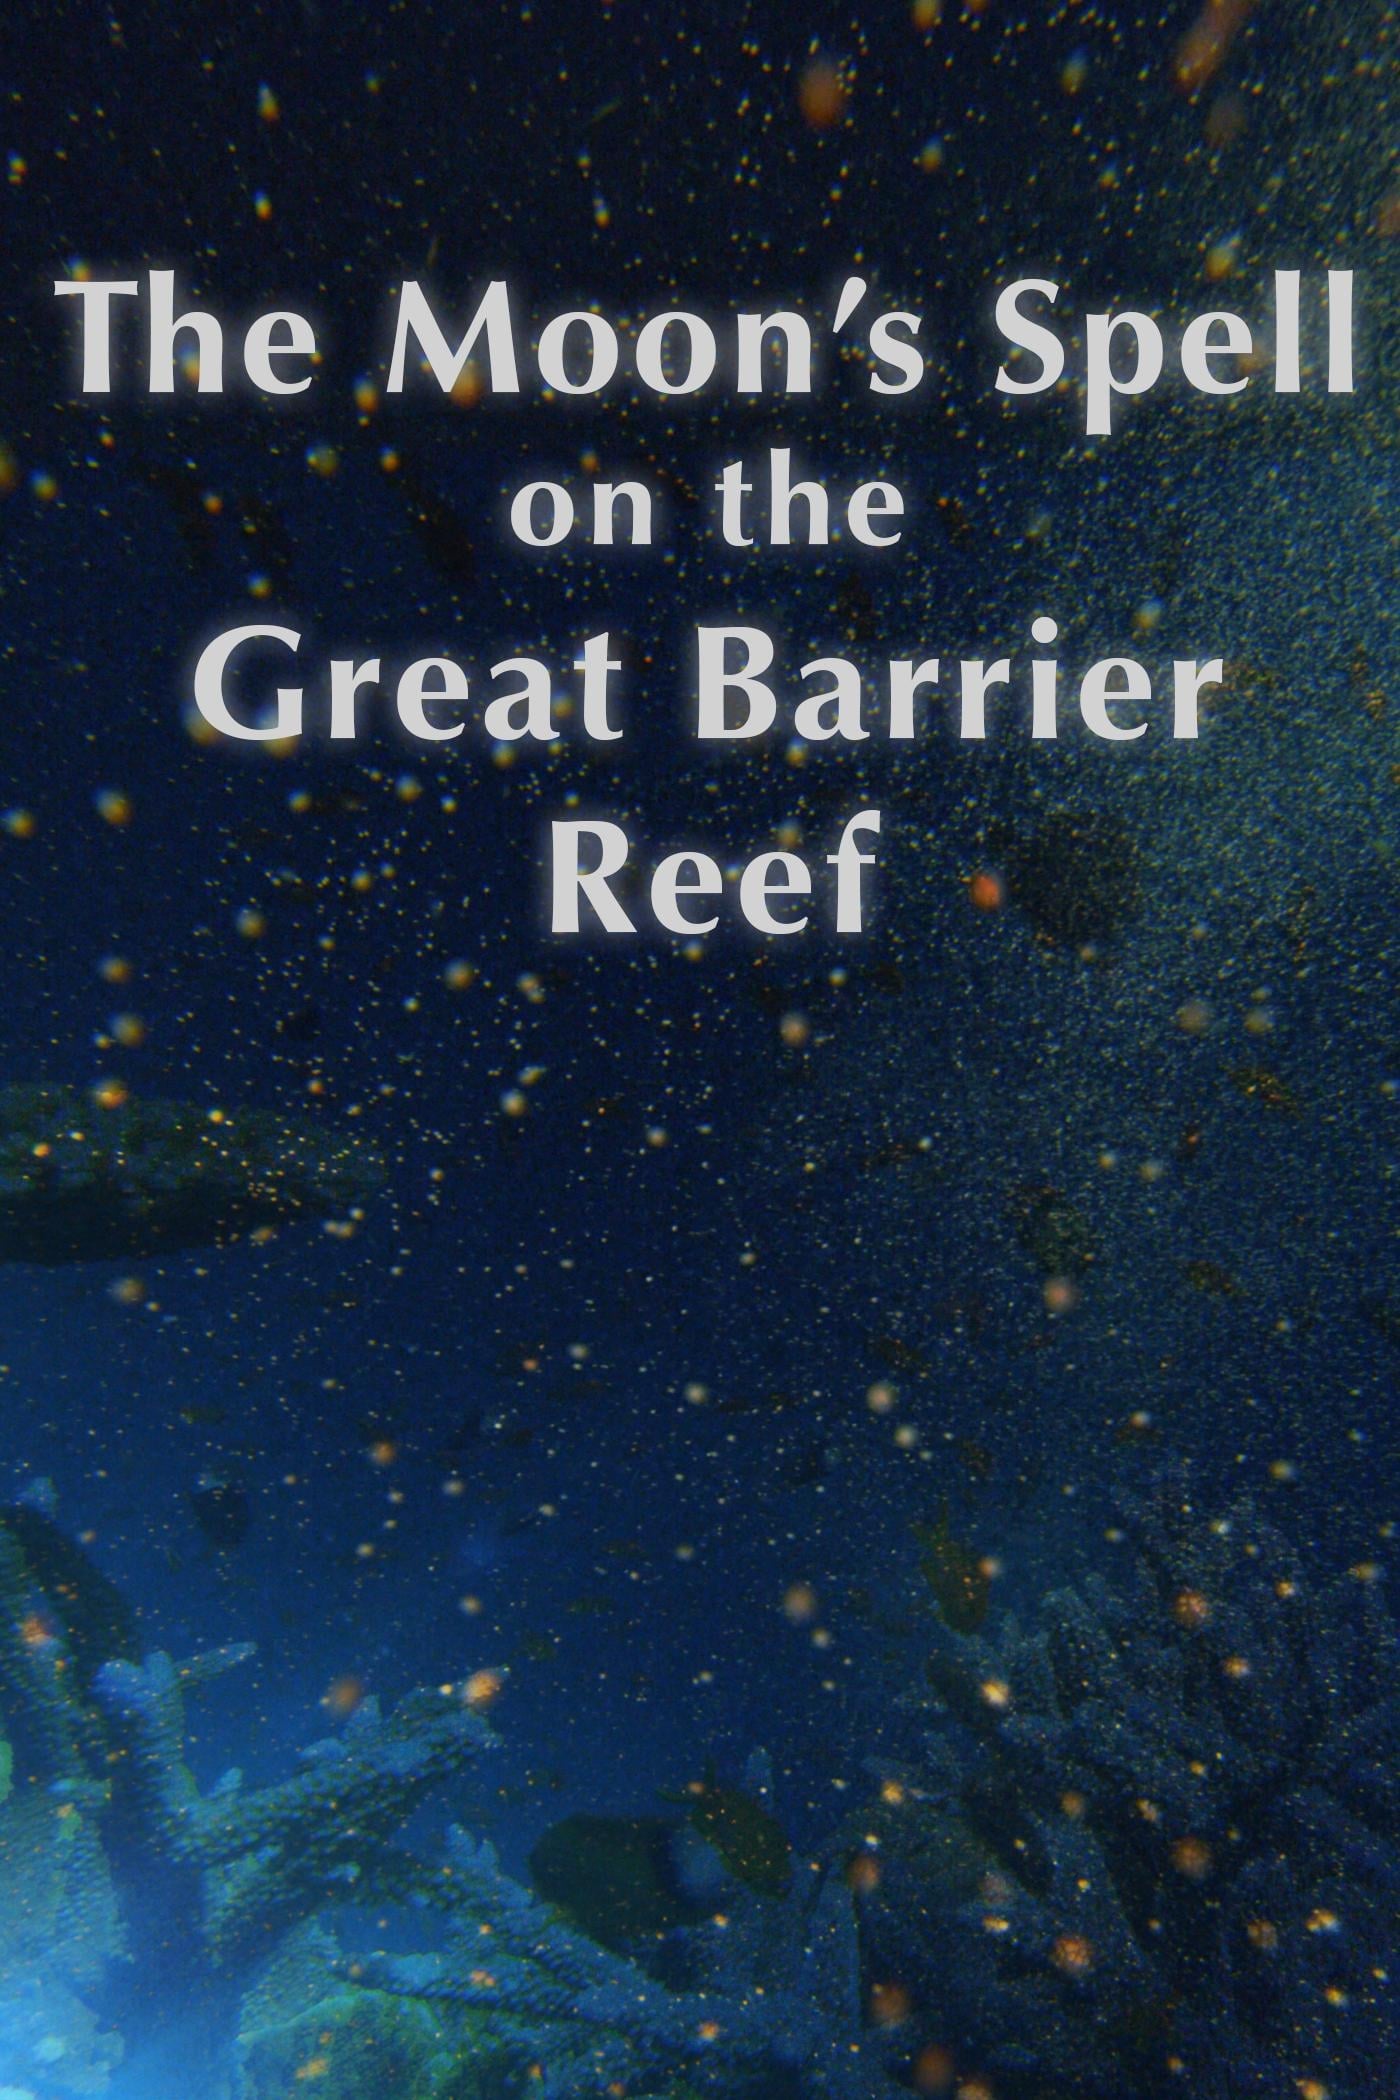 The Moon's Spell on the Great Barrier Reef